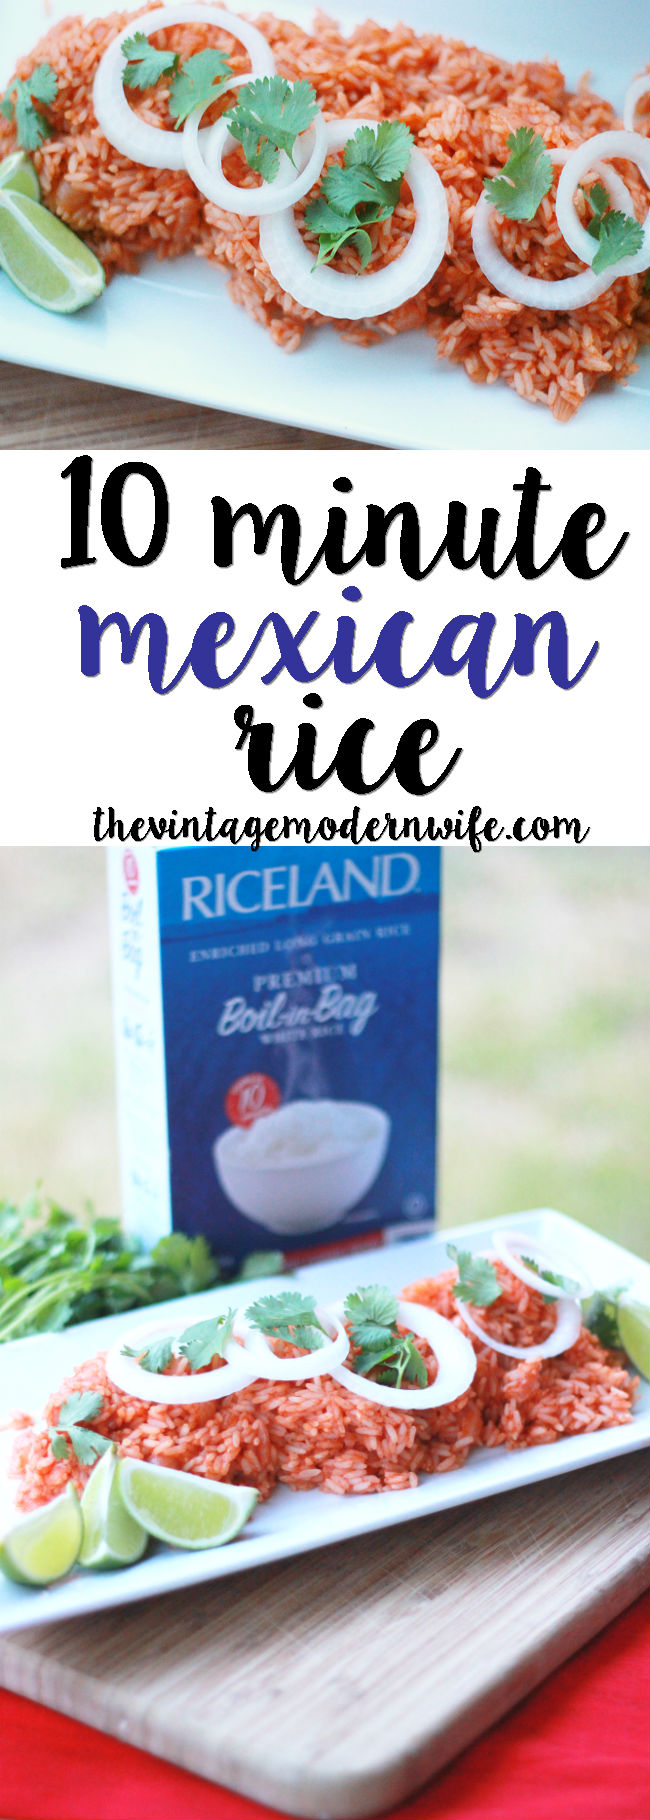 Want to make Mexican Rice but don't have the time? Check out this 10 Minute Mexican Rice recipe from The Vintage Modern Wife! It's so delicious! #ProntoPerfectRice 